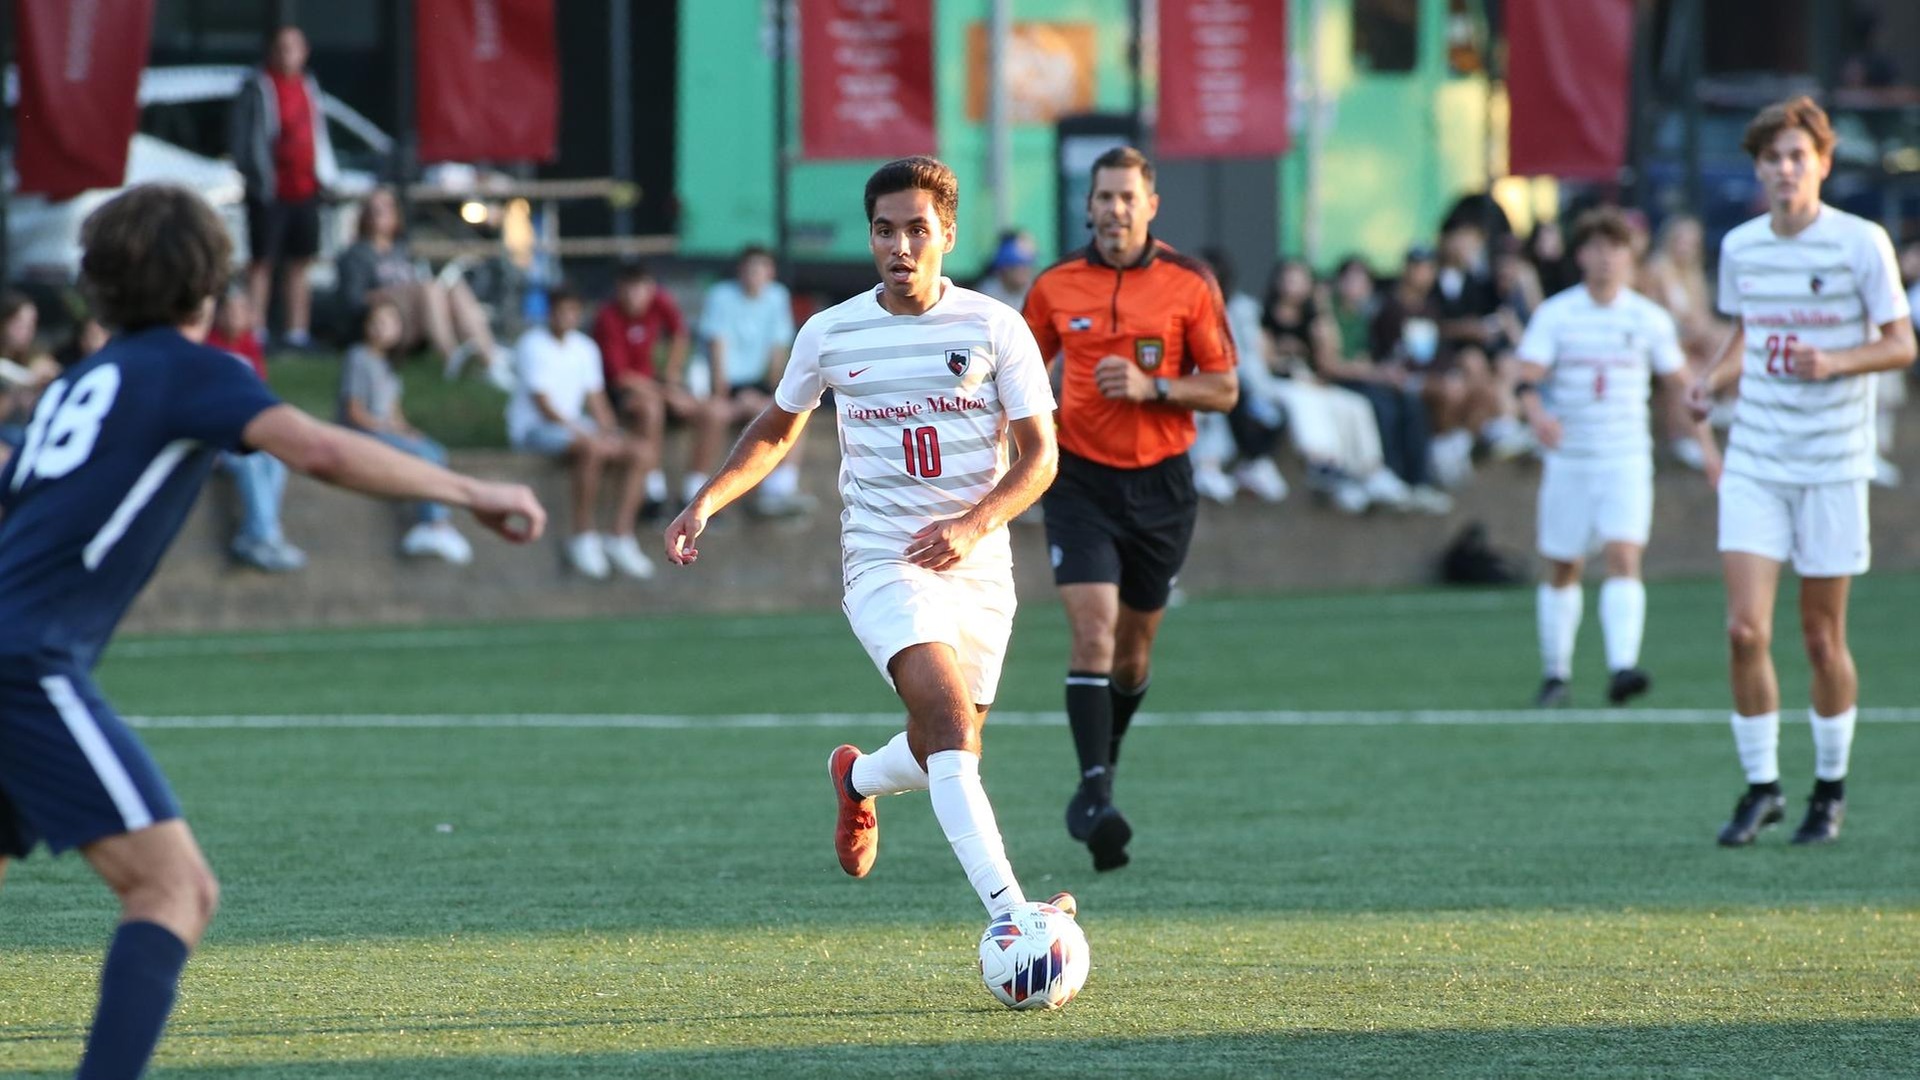 #18 Tartans Run Record to 6-0 With 2-1 Home Win